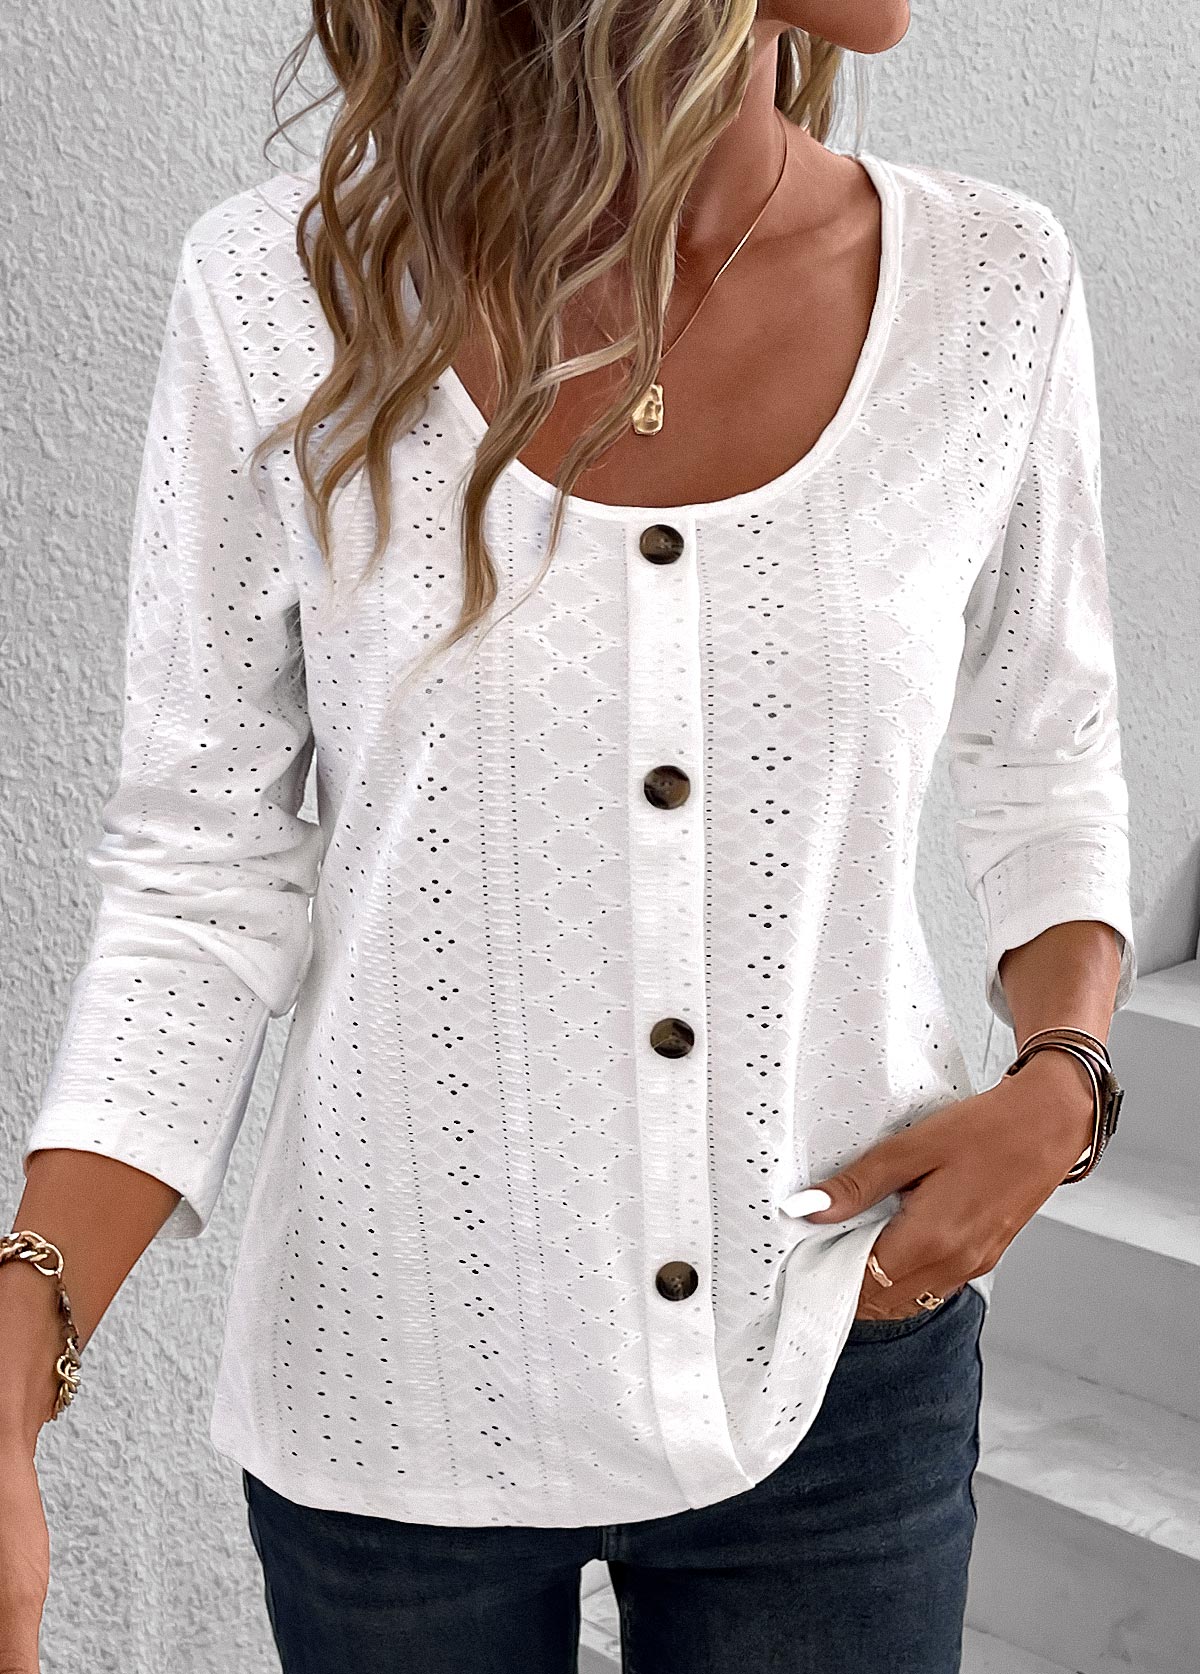 White Button Long Sleeve Scoop Neck Hollow T Shirt